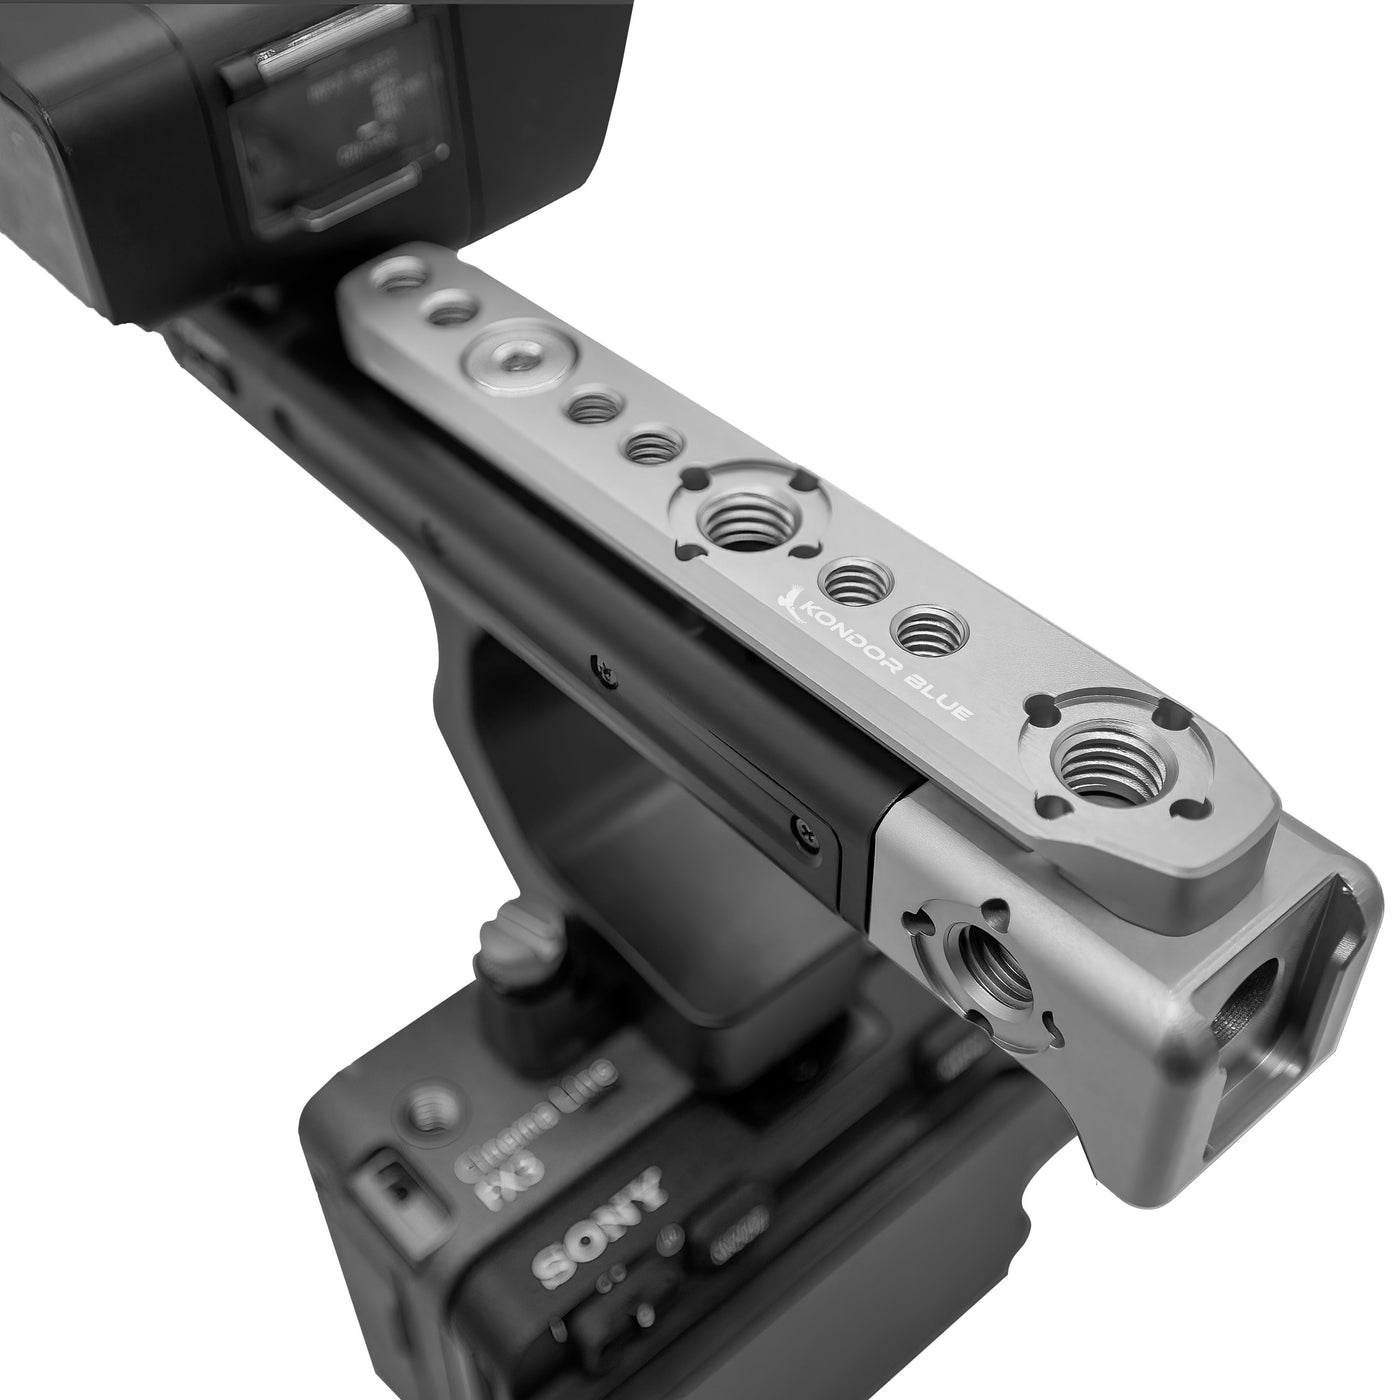 Sony FX3 XLR Top Handle Extension - Space Gray or Raven Black